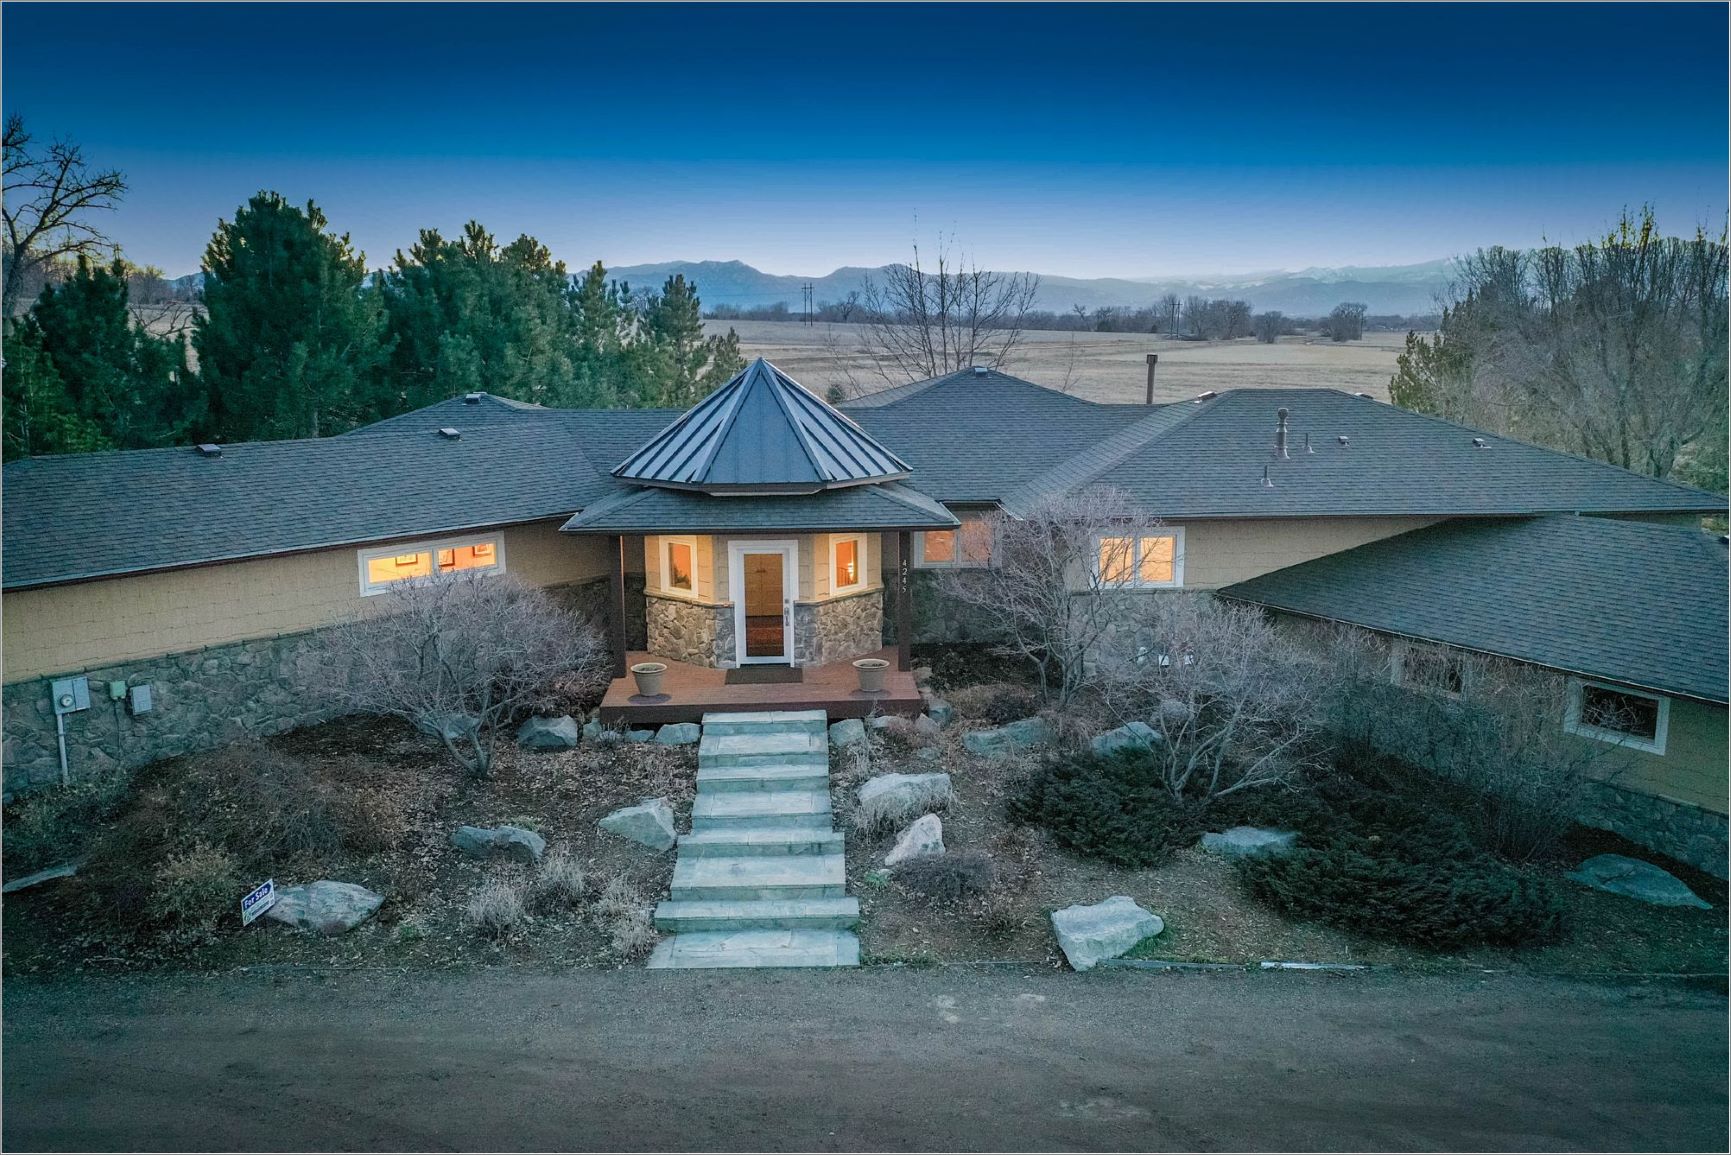 A ranch home at twilight with mountains in the distance